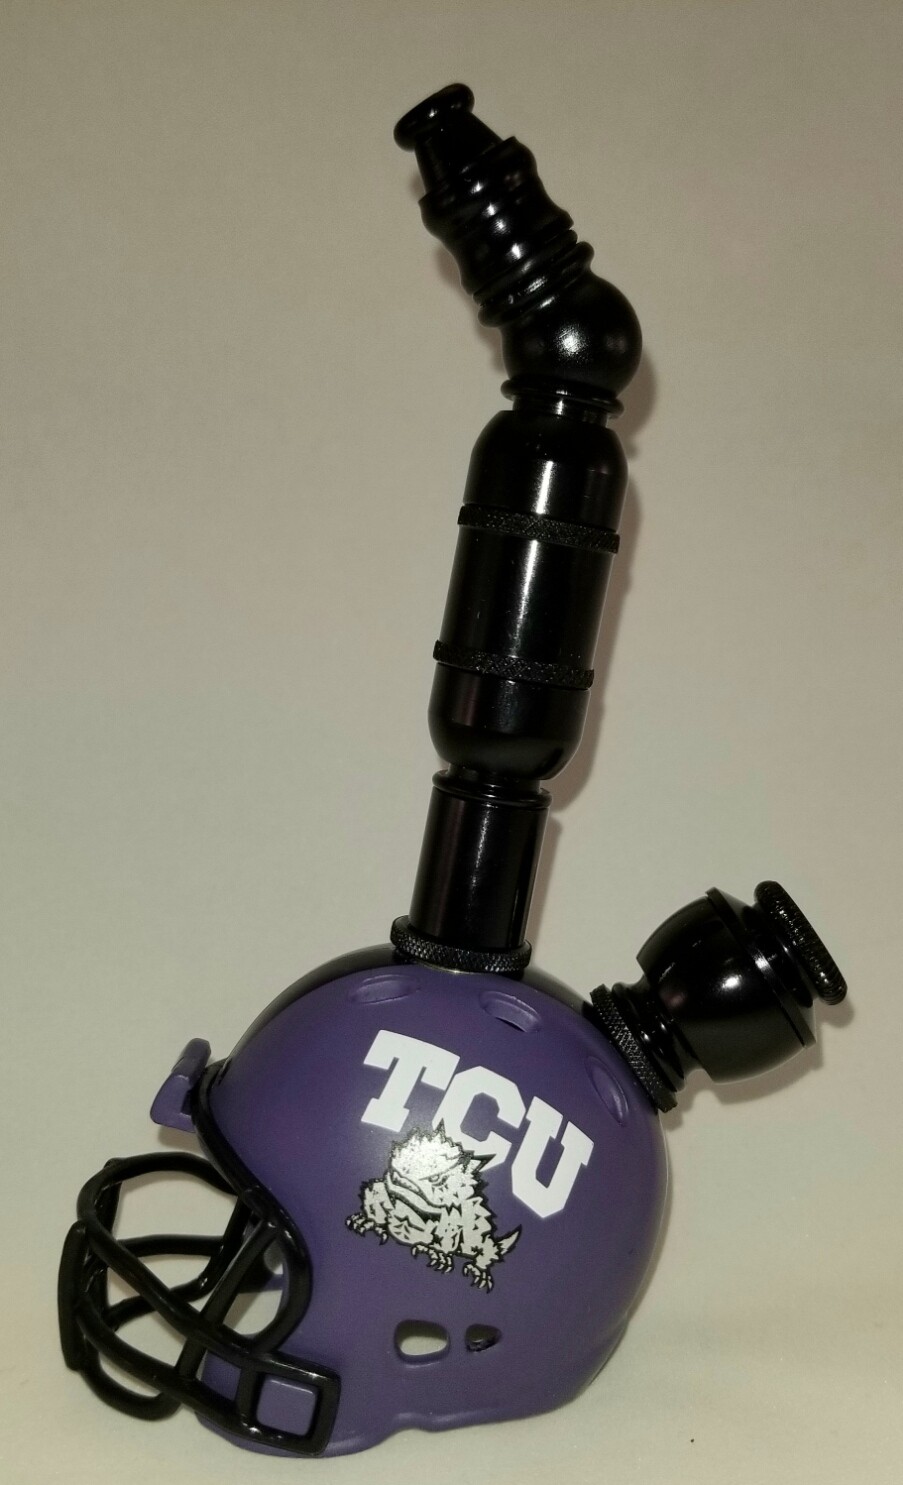 TCU HORNED FROGS "BAD ASS" FOOTBALL HELMET SMOKING PIPE Upright/Black Anodized